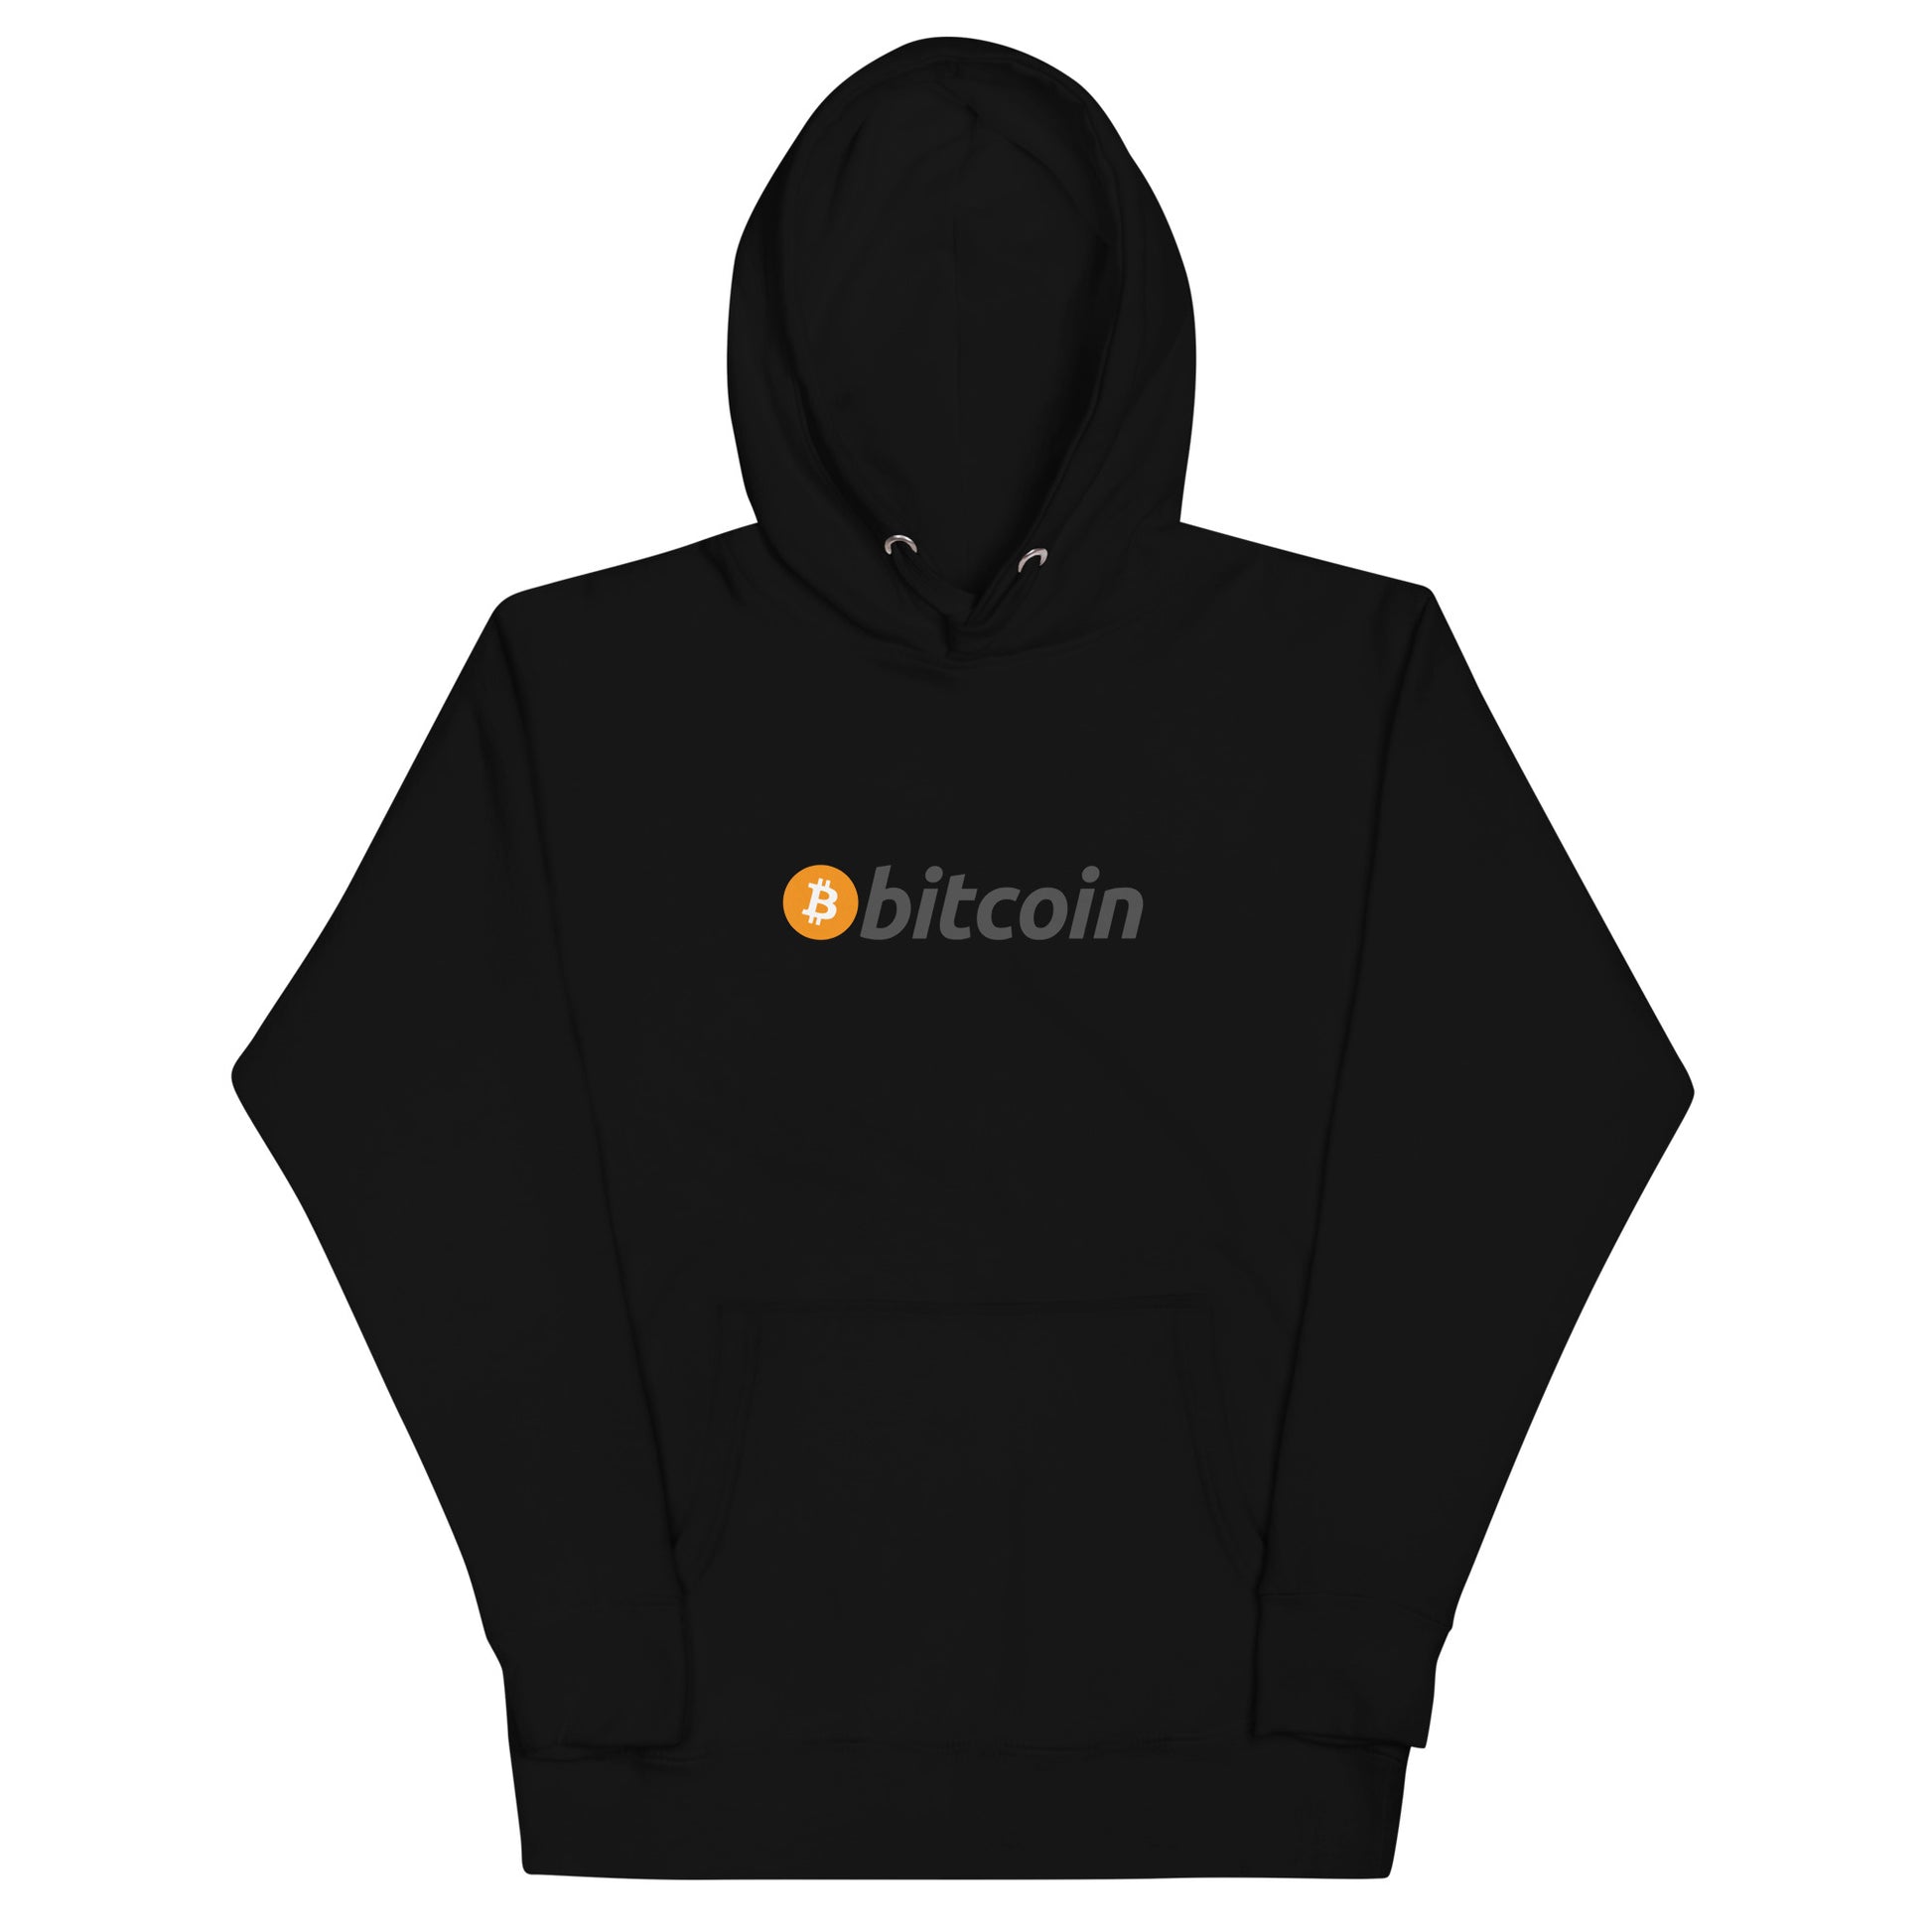 Bitcoin To The Moon Hoodie v01 - Hodlers Crypto Merch Brand